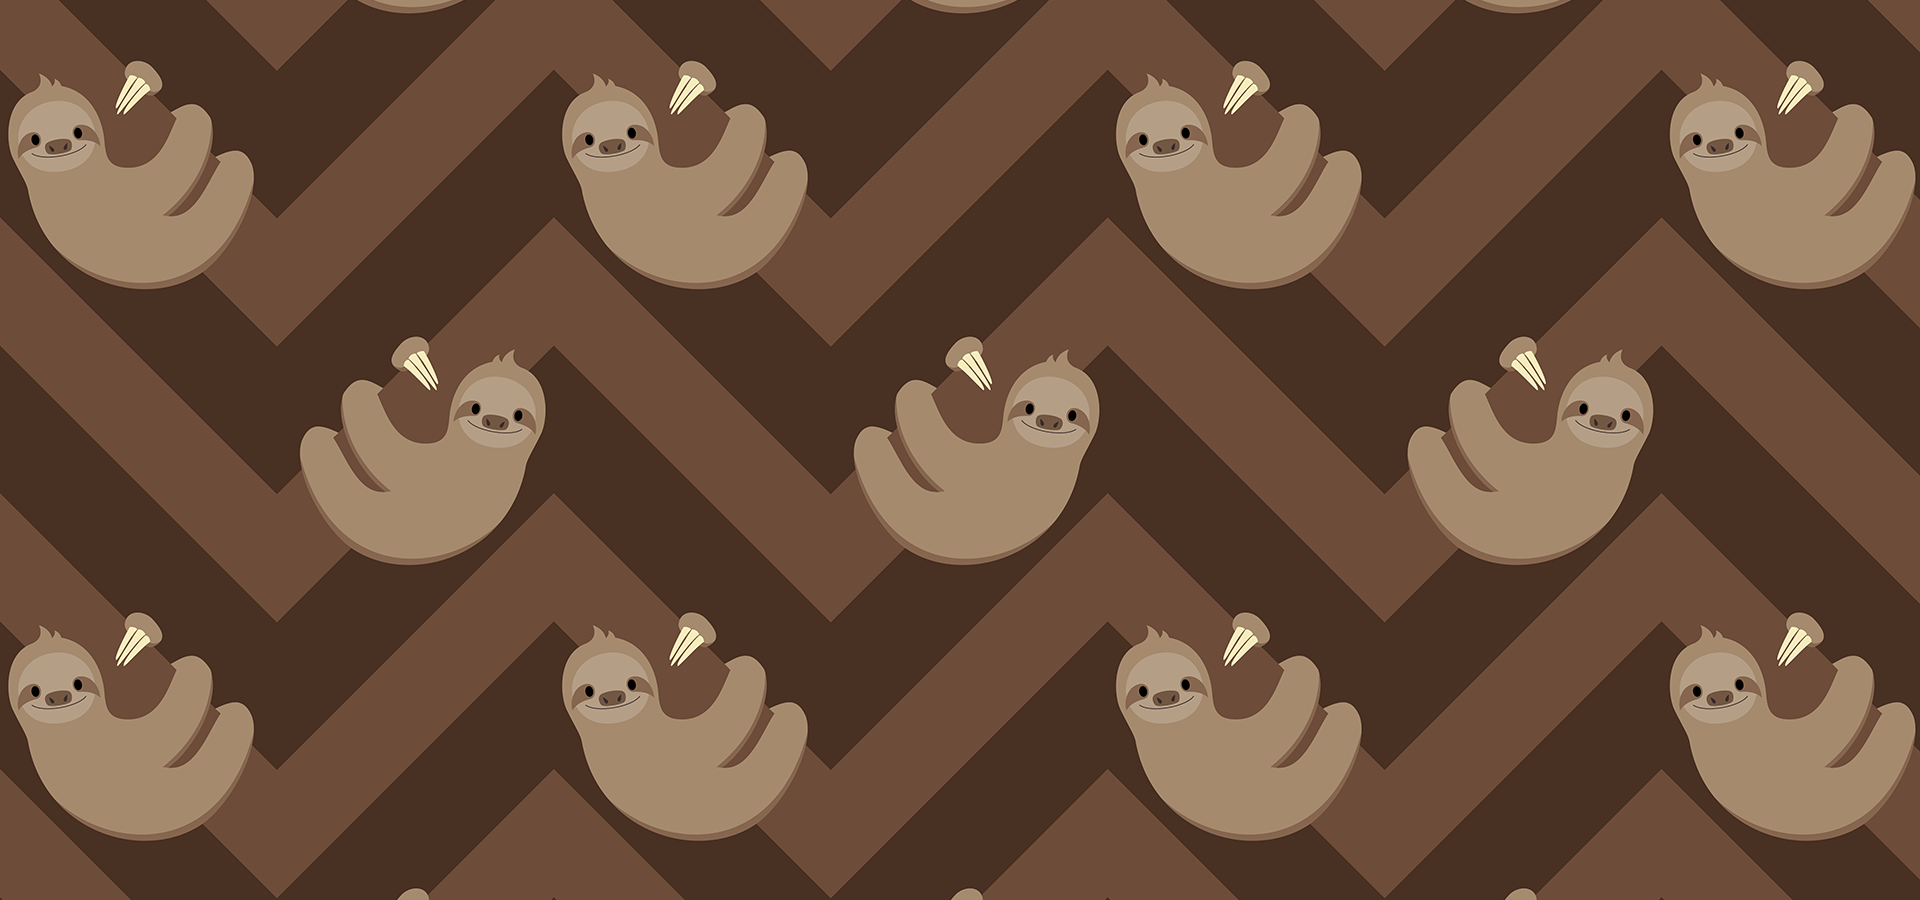 Sloths and chevrons